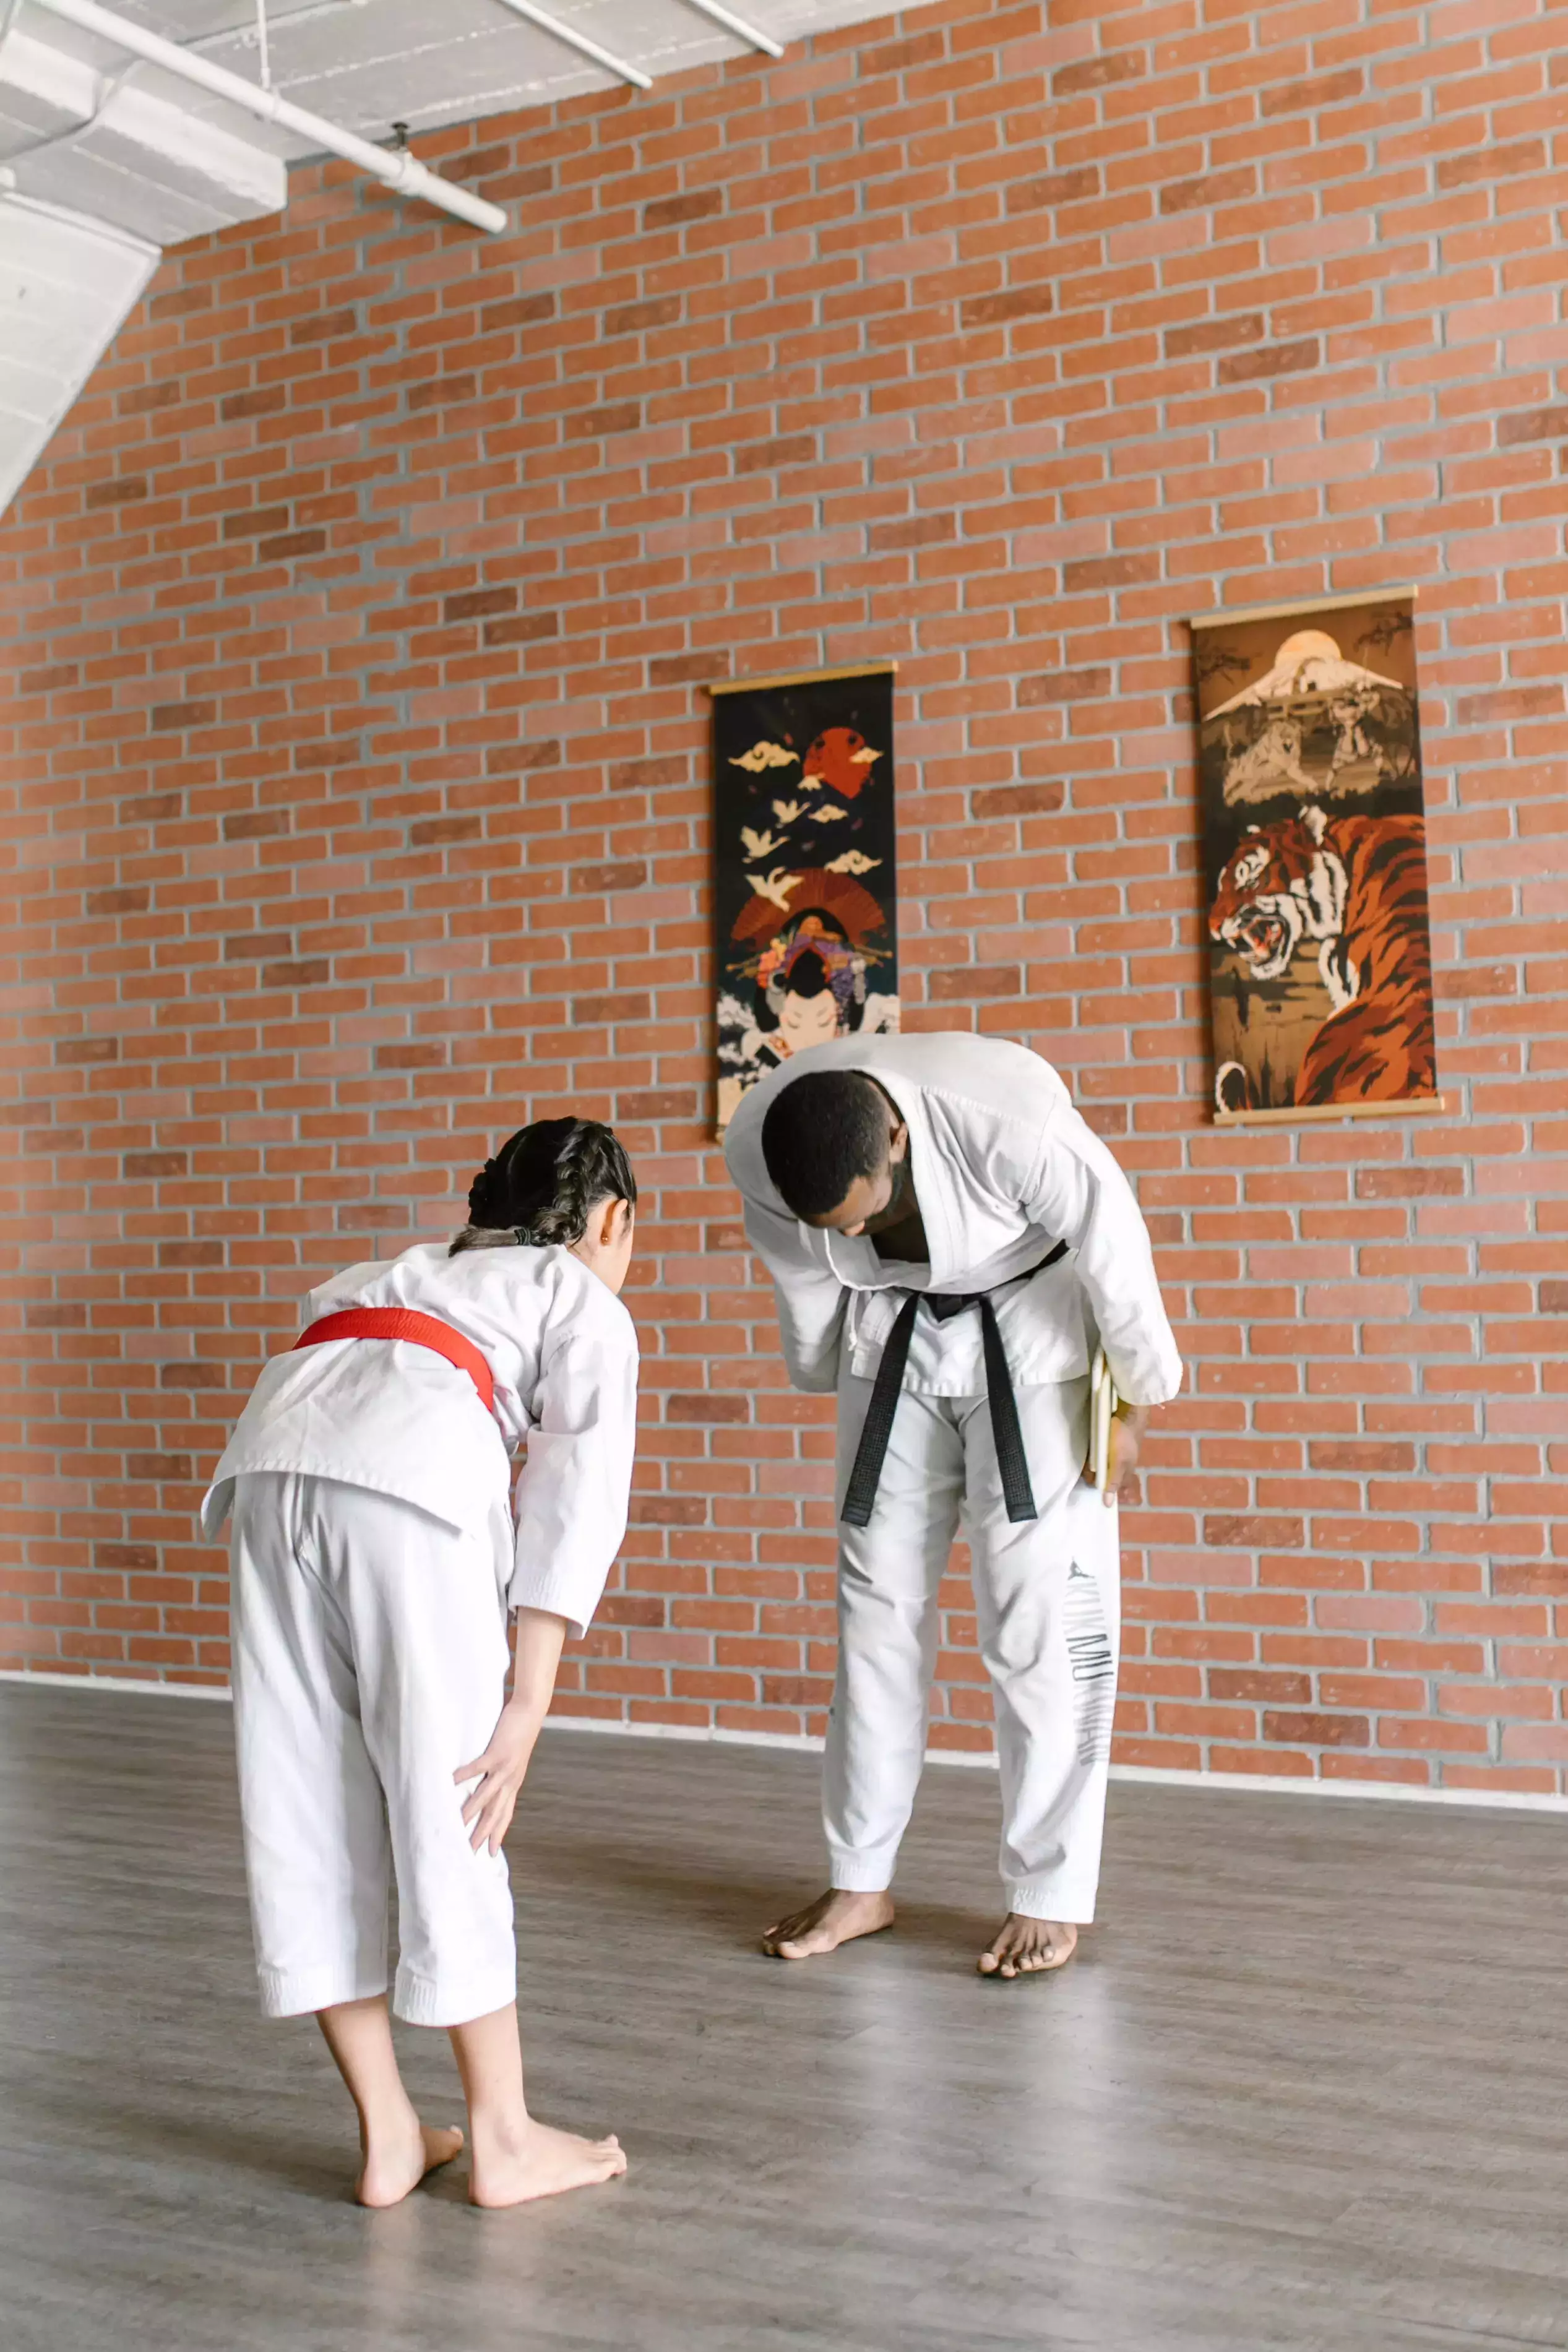 Two people showing respect to each other before a jiu-jitsu match